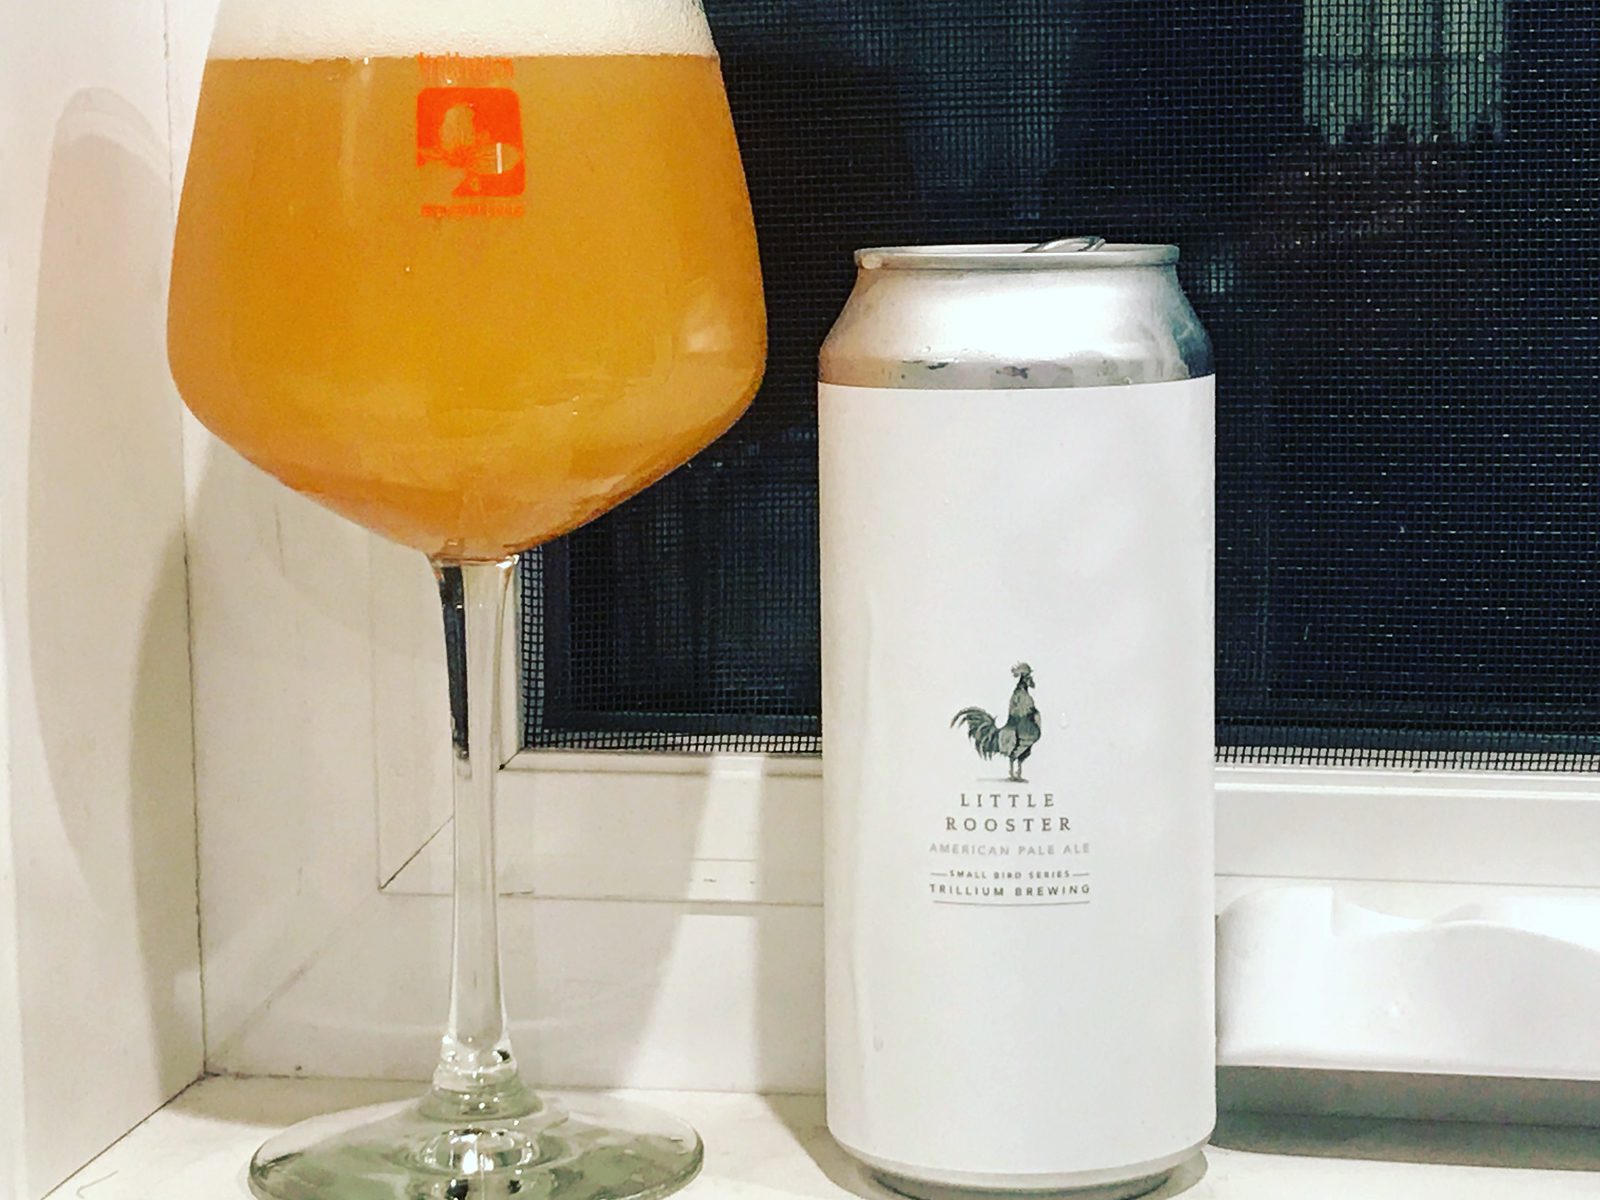 Trillium Brewing Company: Little Rooster